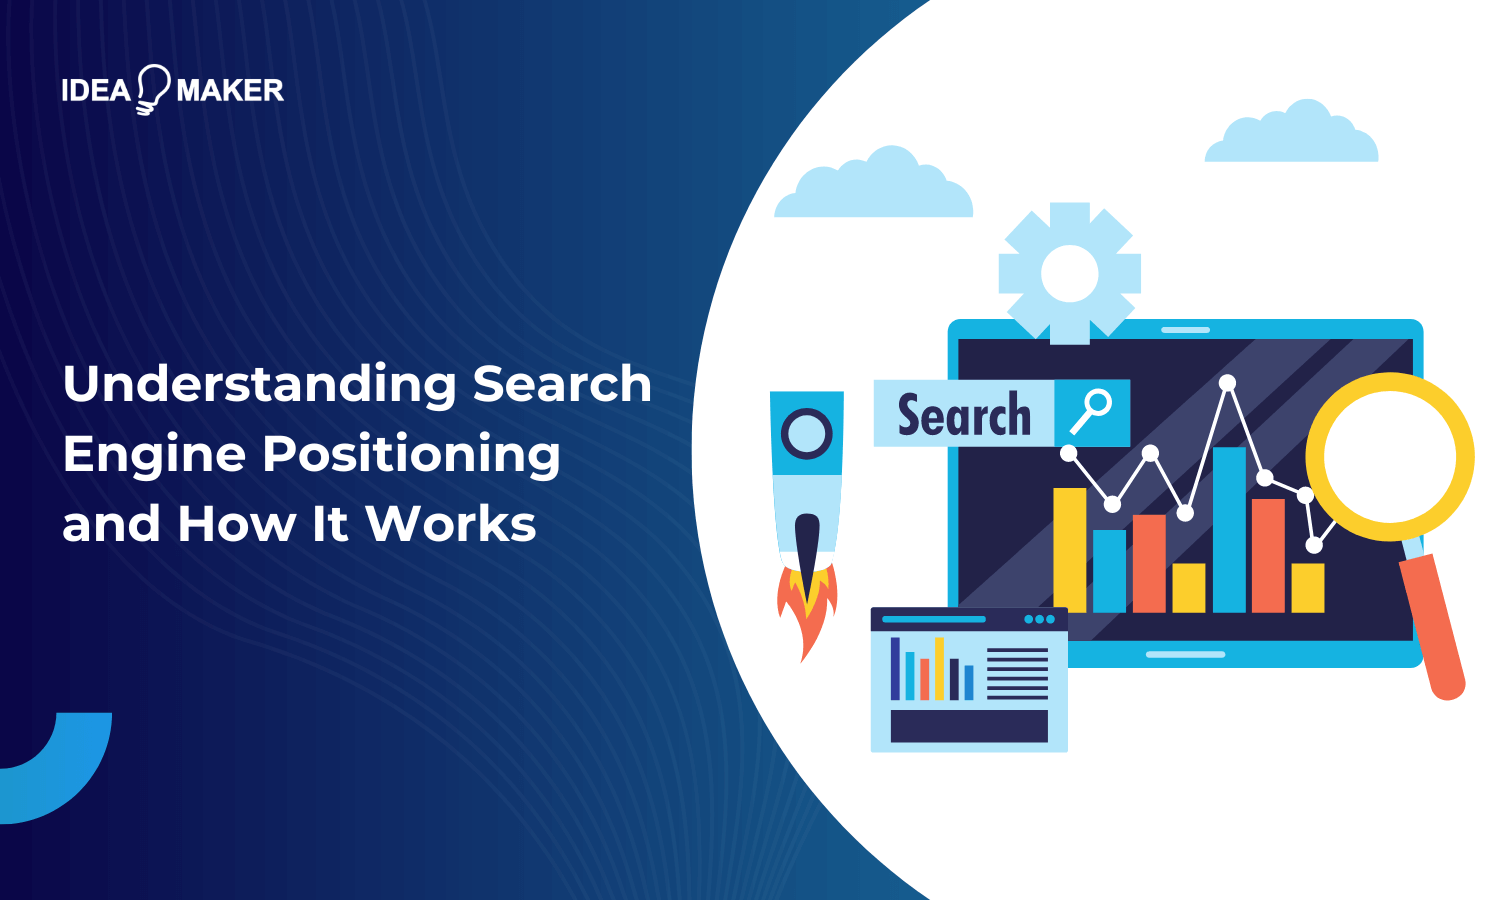 Understanding Search Engine Positioning and How It Works